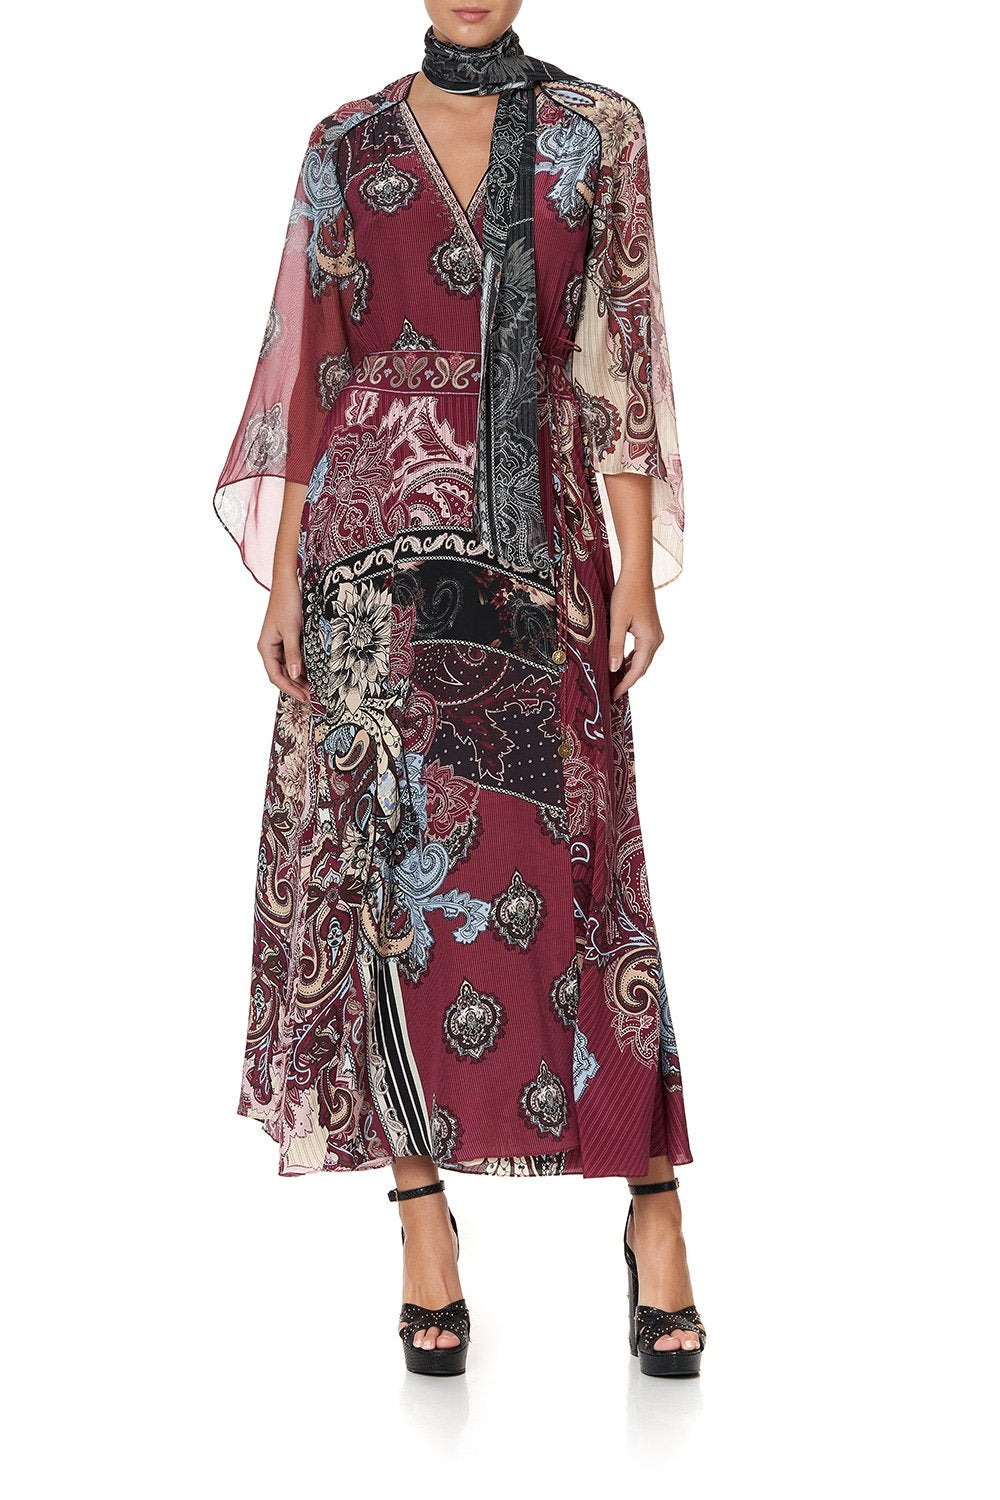 WRAP DRESS WITH NECK TIE TALE OF THE FIRE BIRD – CAMILLA